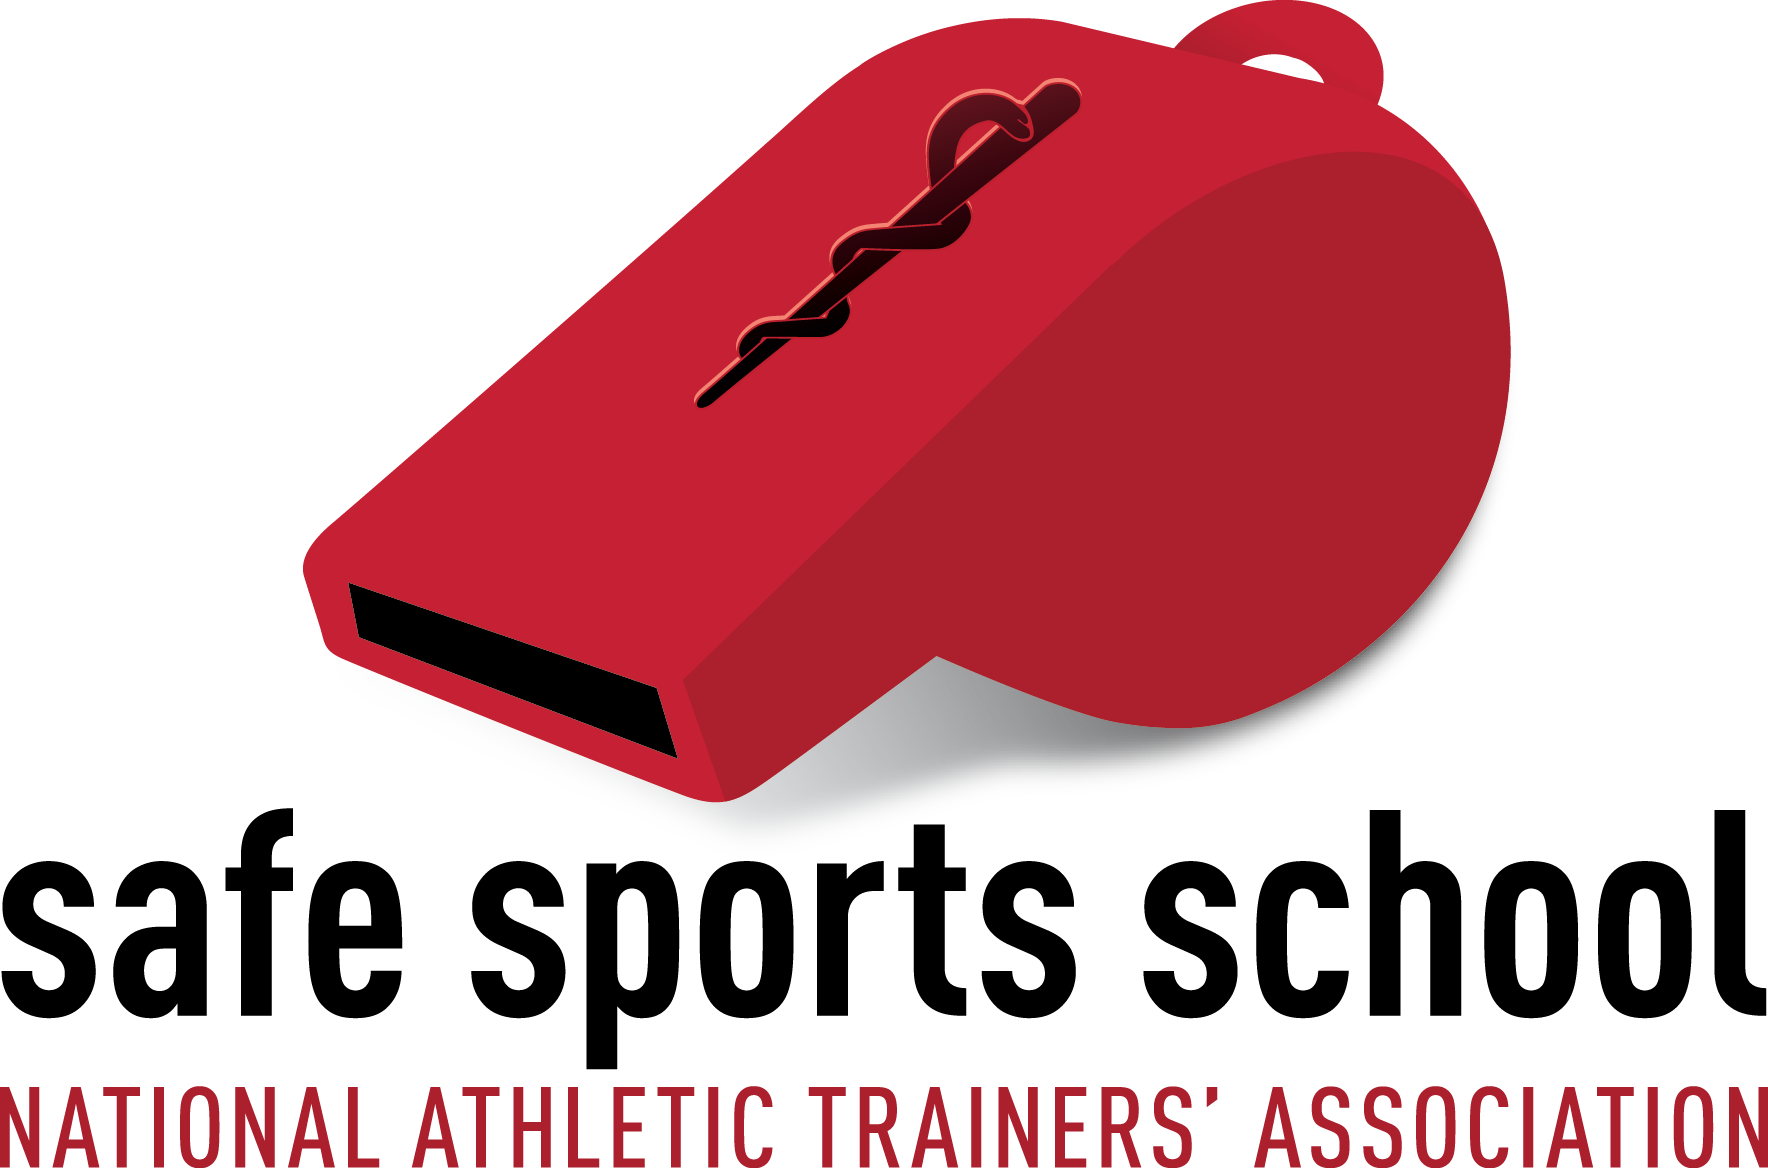 diploma clipart athletic trainer